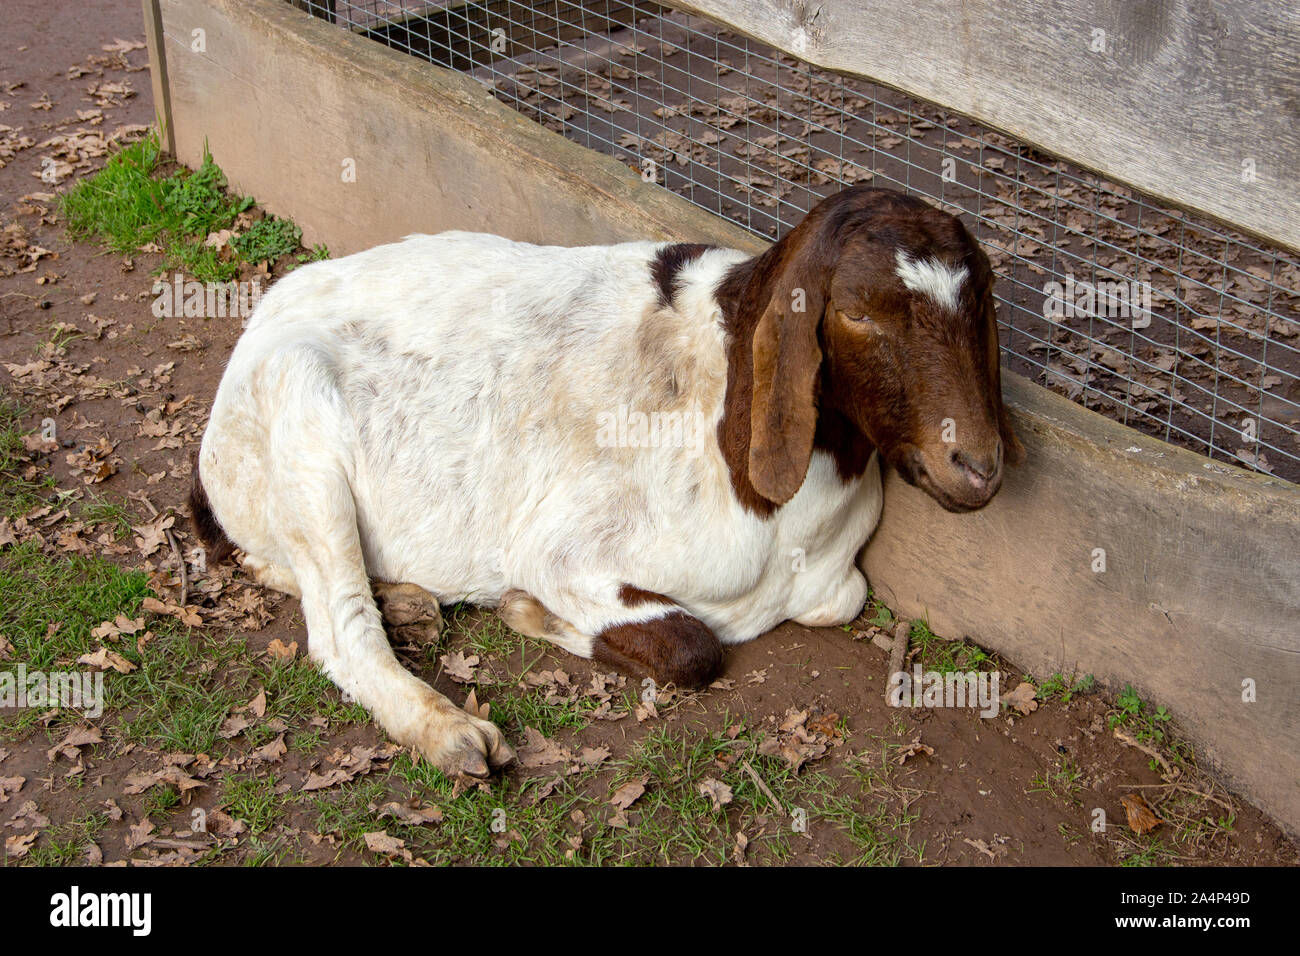 View of a Boer goat, a meat goat breed, from the breed of domestic goats Stock Photo